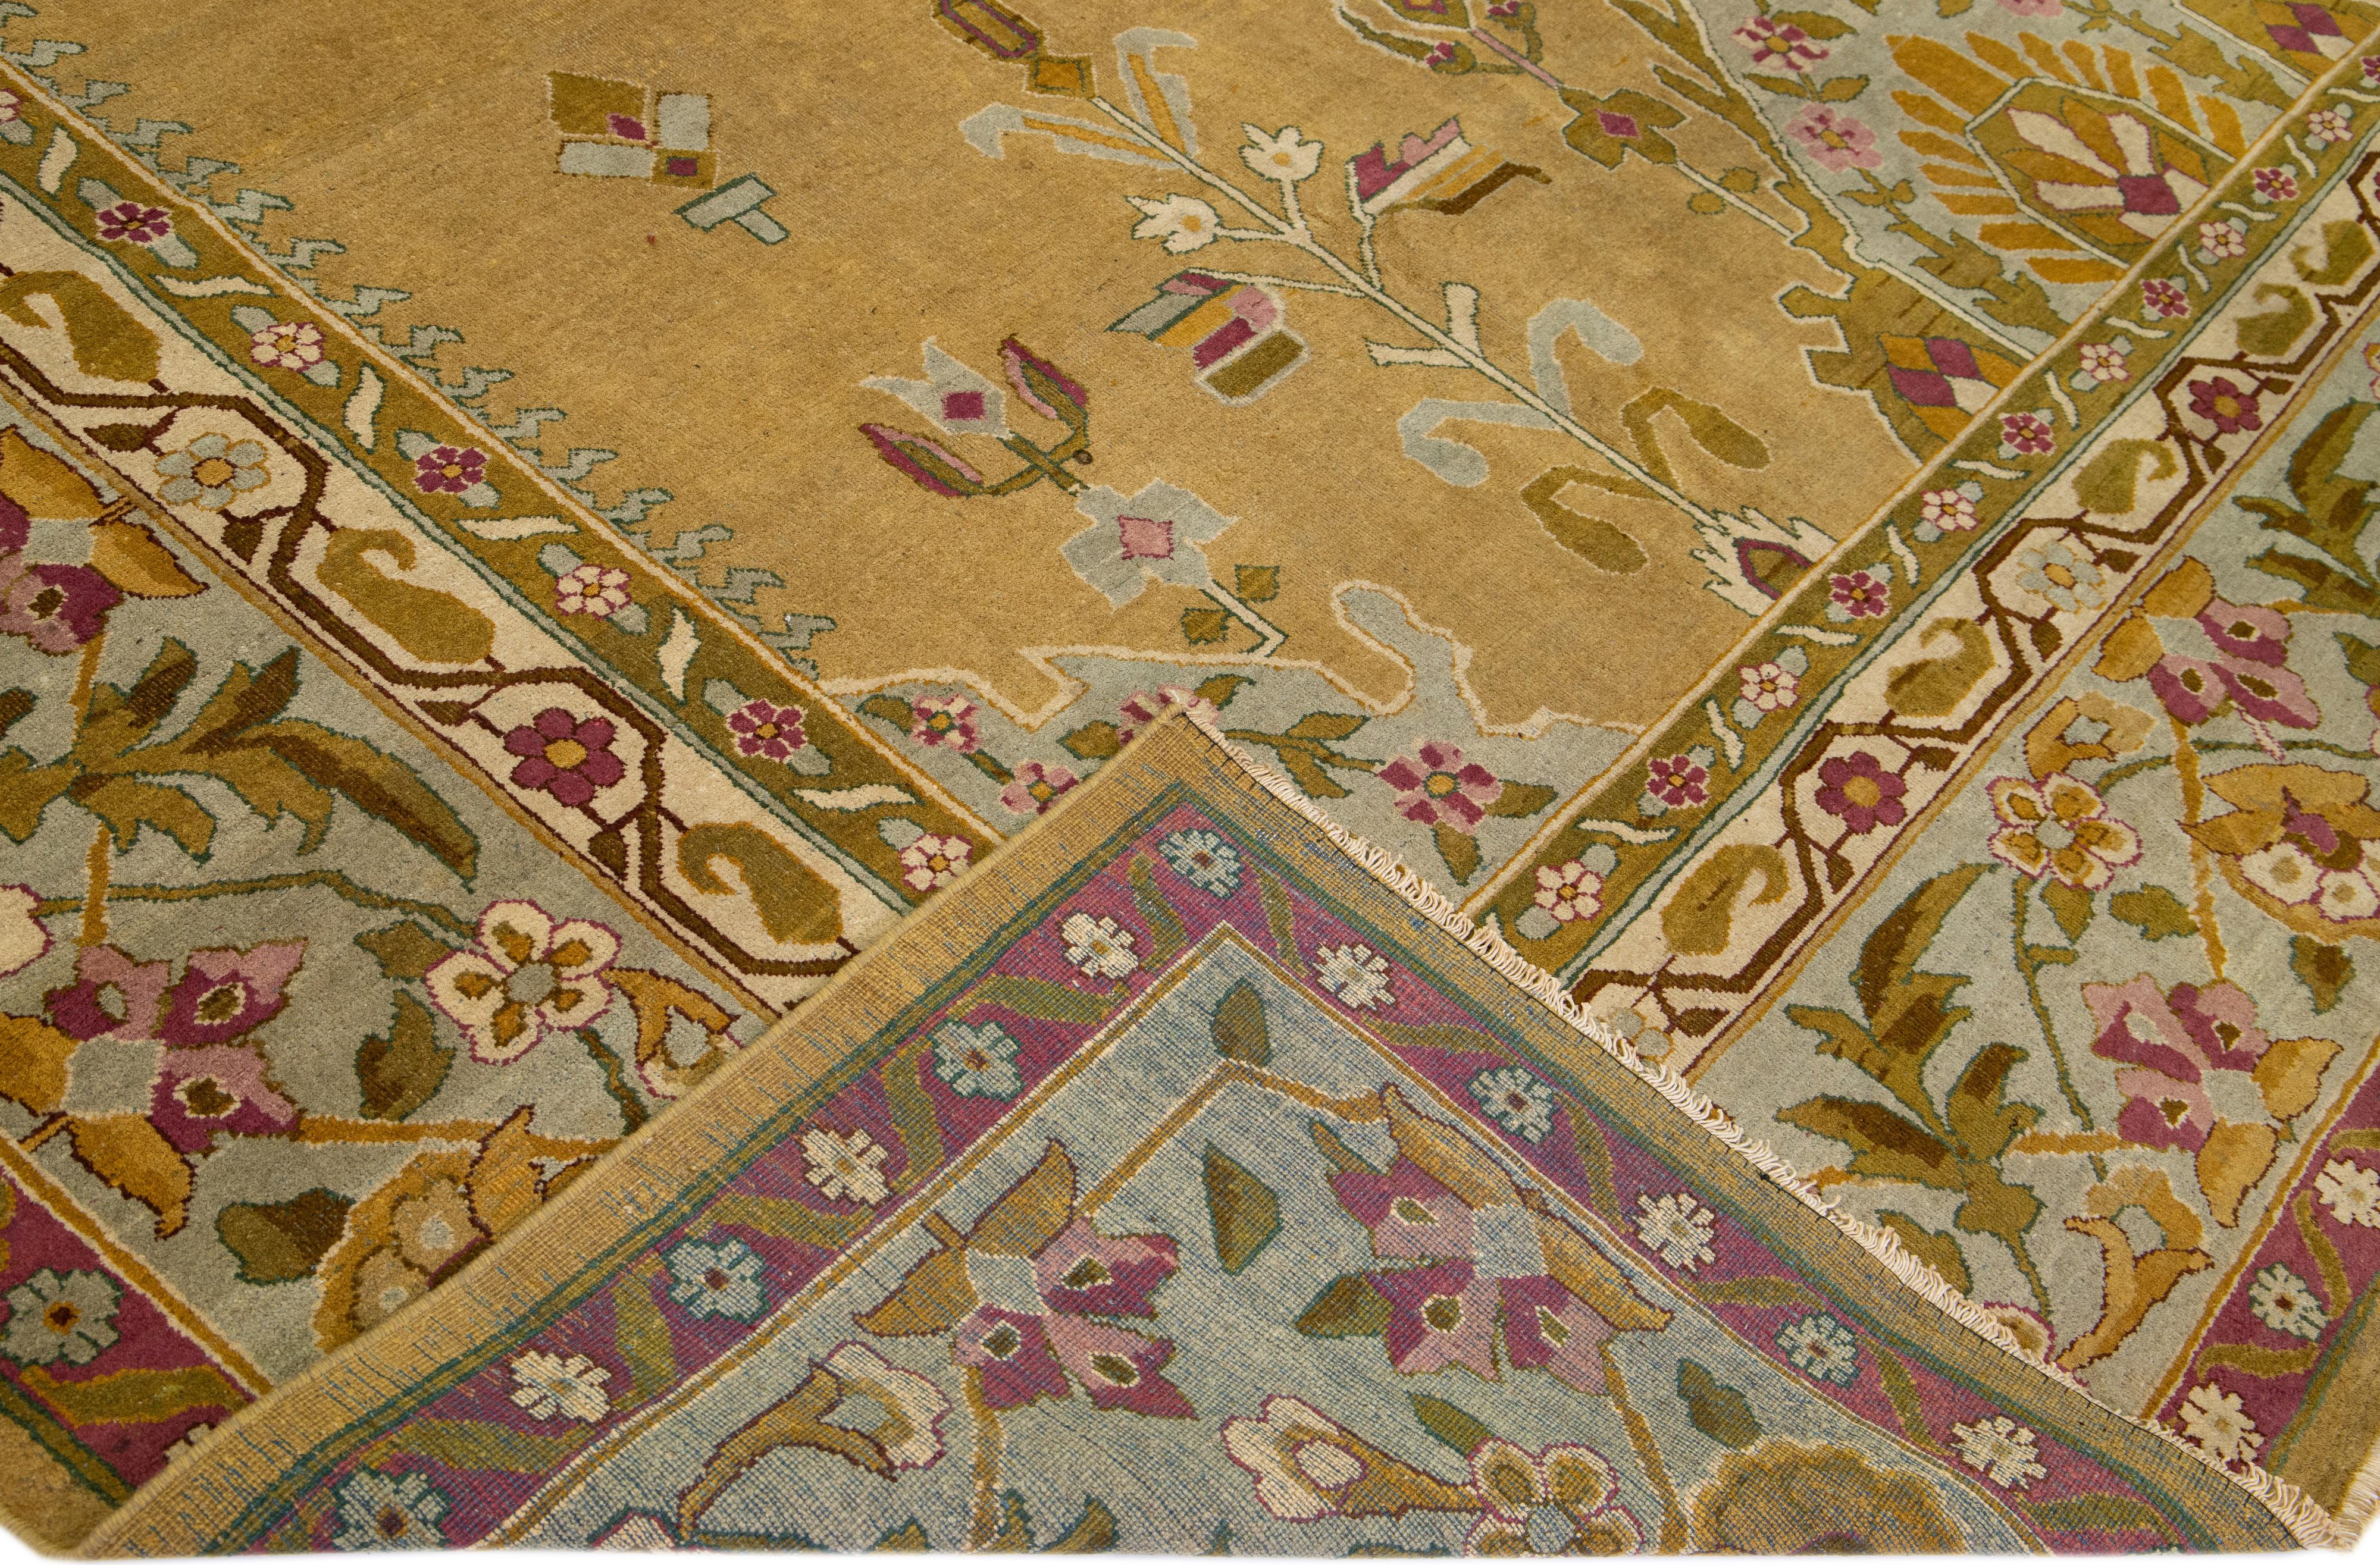 Beautiful antique Agra hand-knotted wool rug with a goldenrod field. This Indian rug has multicolor accents in a gorgeous all-over medallion floral design.

This rug measures: 14'2